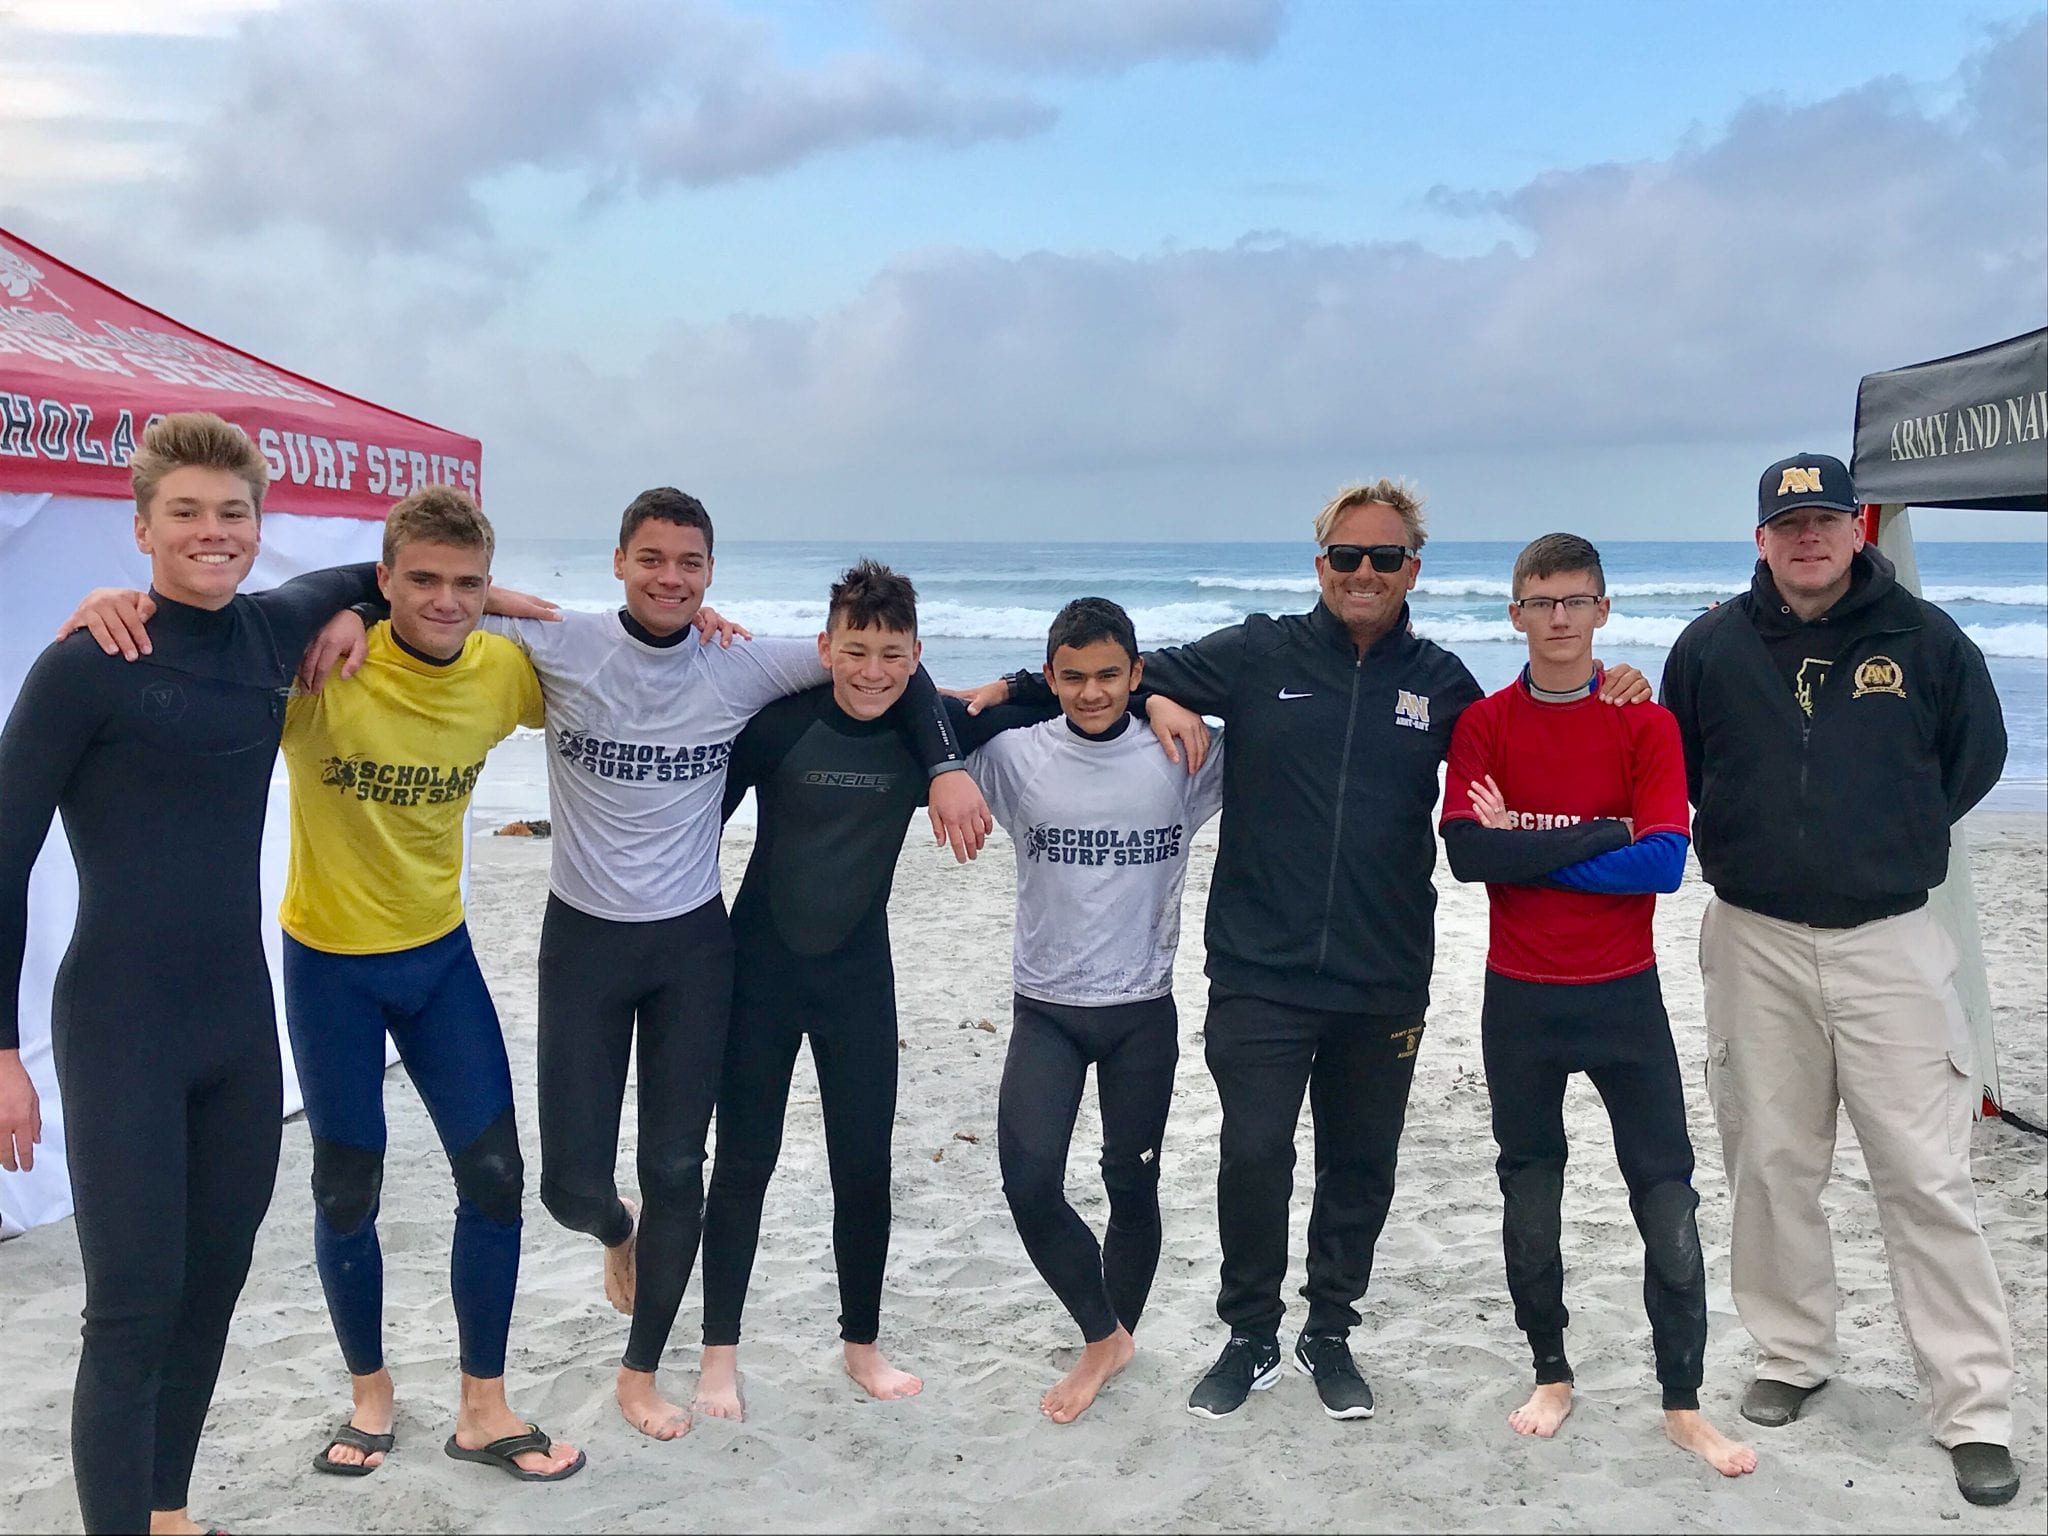 Surf Team Wins 2 Categories At The Scholastic Surf Series Division 5 ...